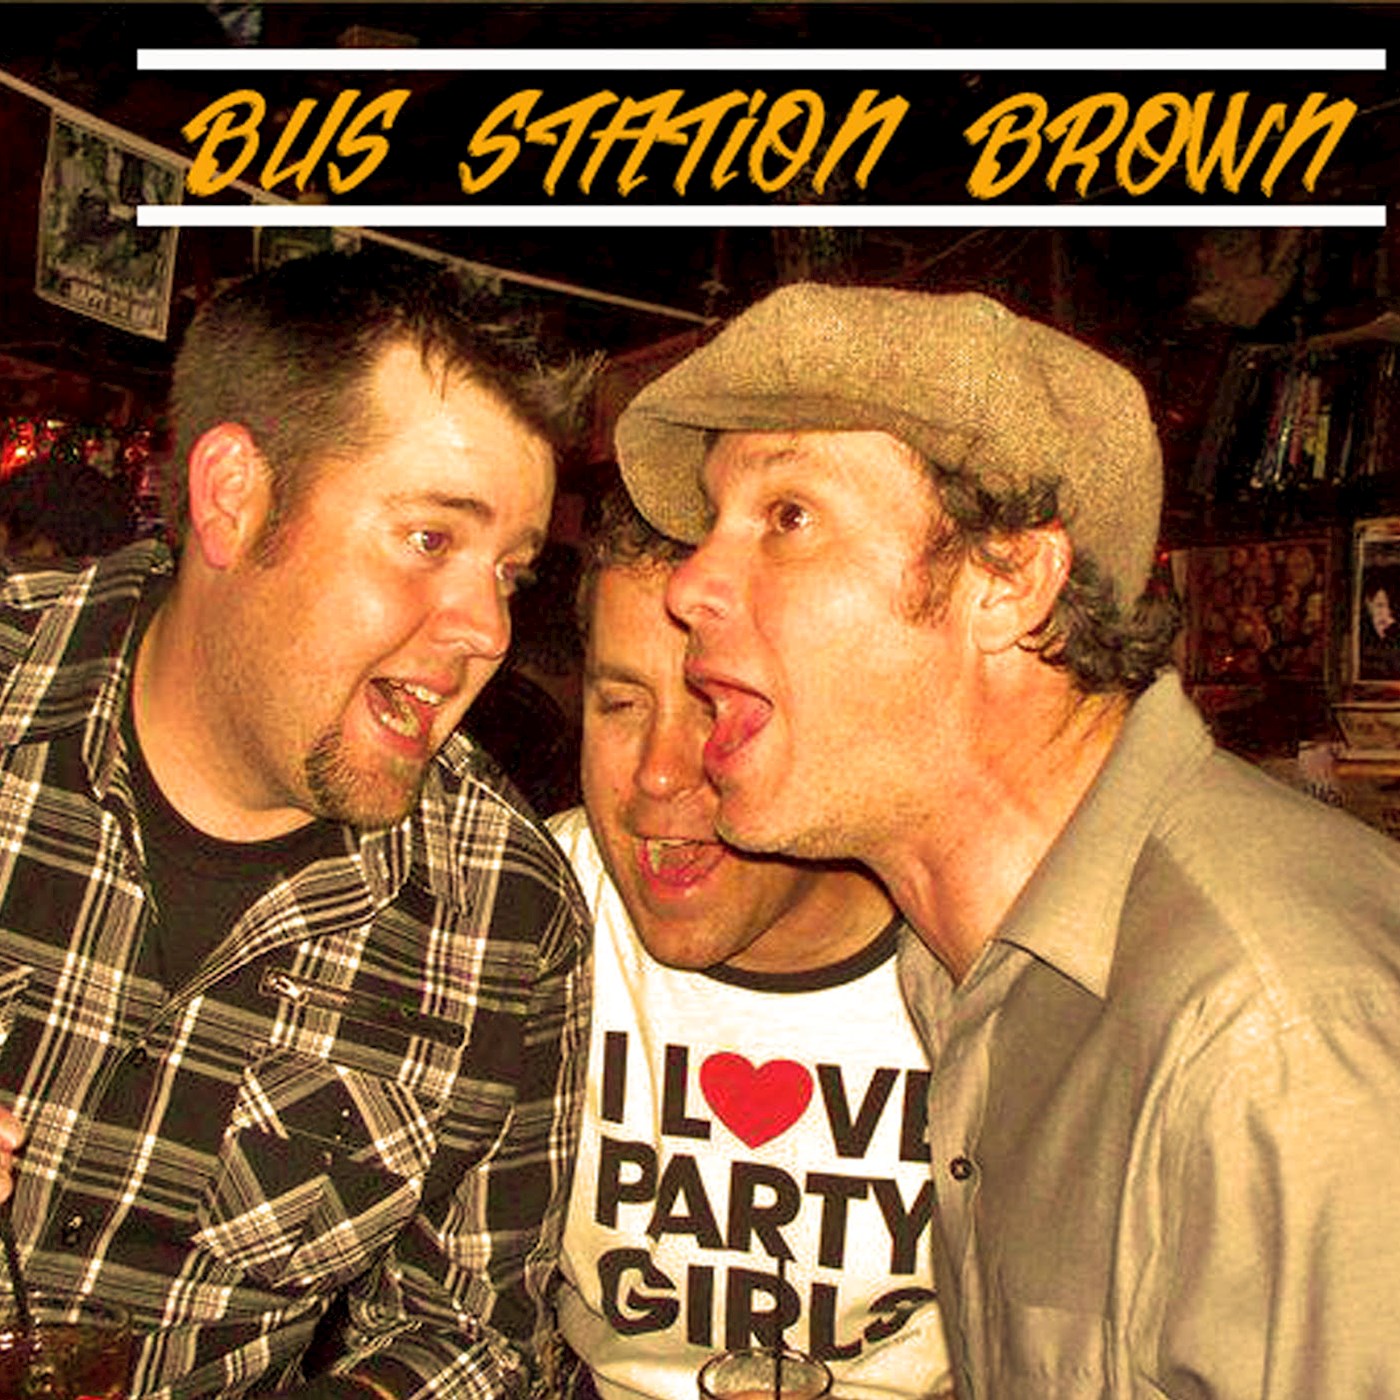 Bus Station Brown